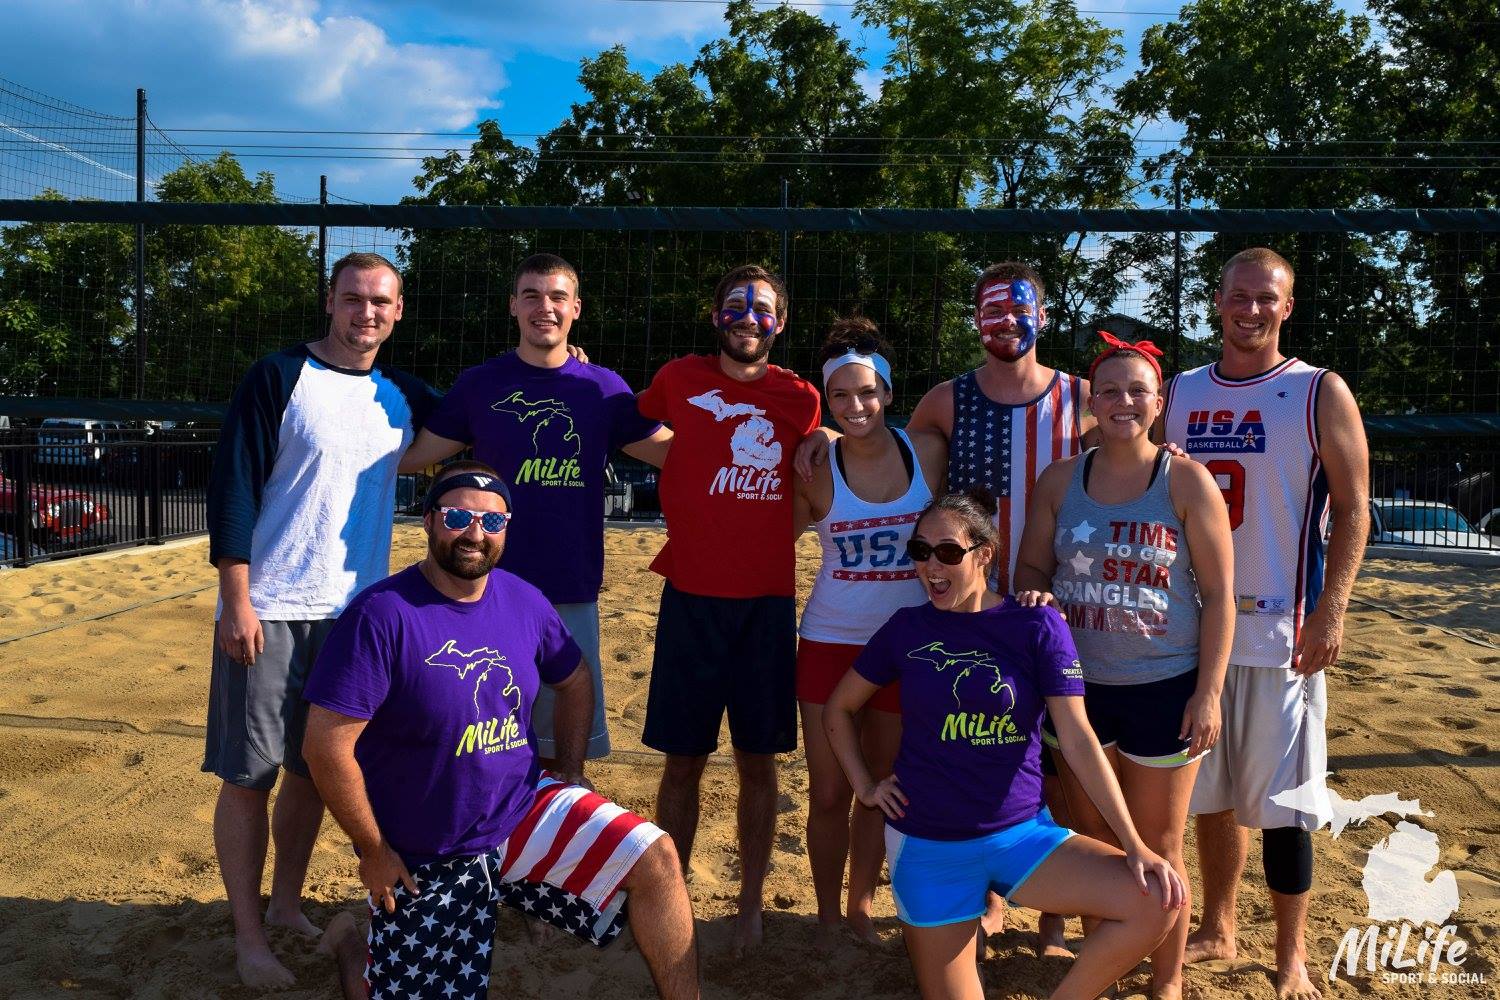 Milife Coed 4v4 Beach Volleyball Tournament Milife L2 8285